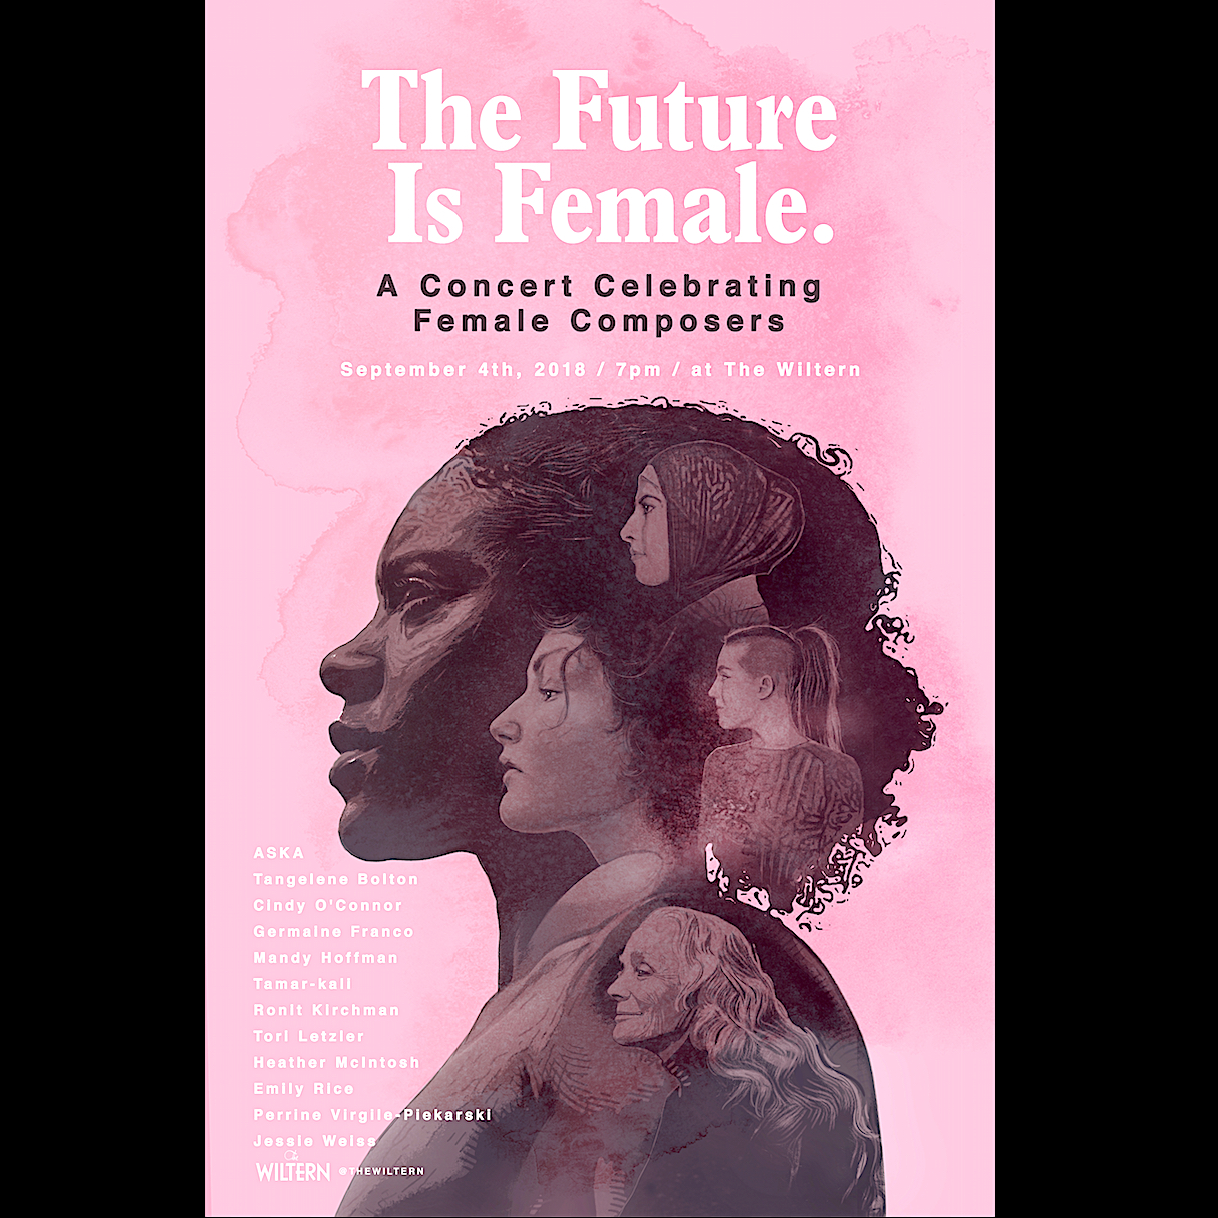 KCRW Presents "The Future is Female: A Concert Celebrating Female Composers" at The Wiltern Sept 4th produced by Tori Letzler.